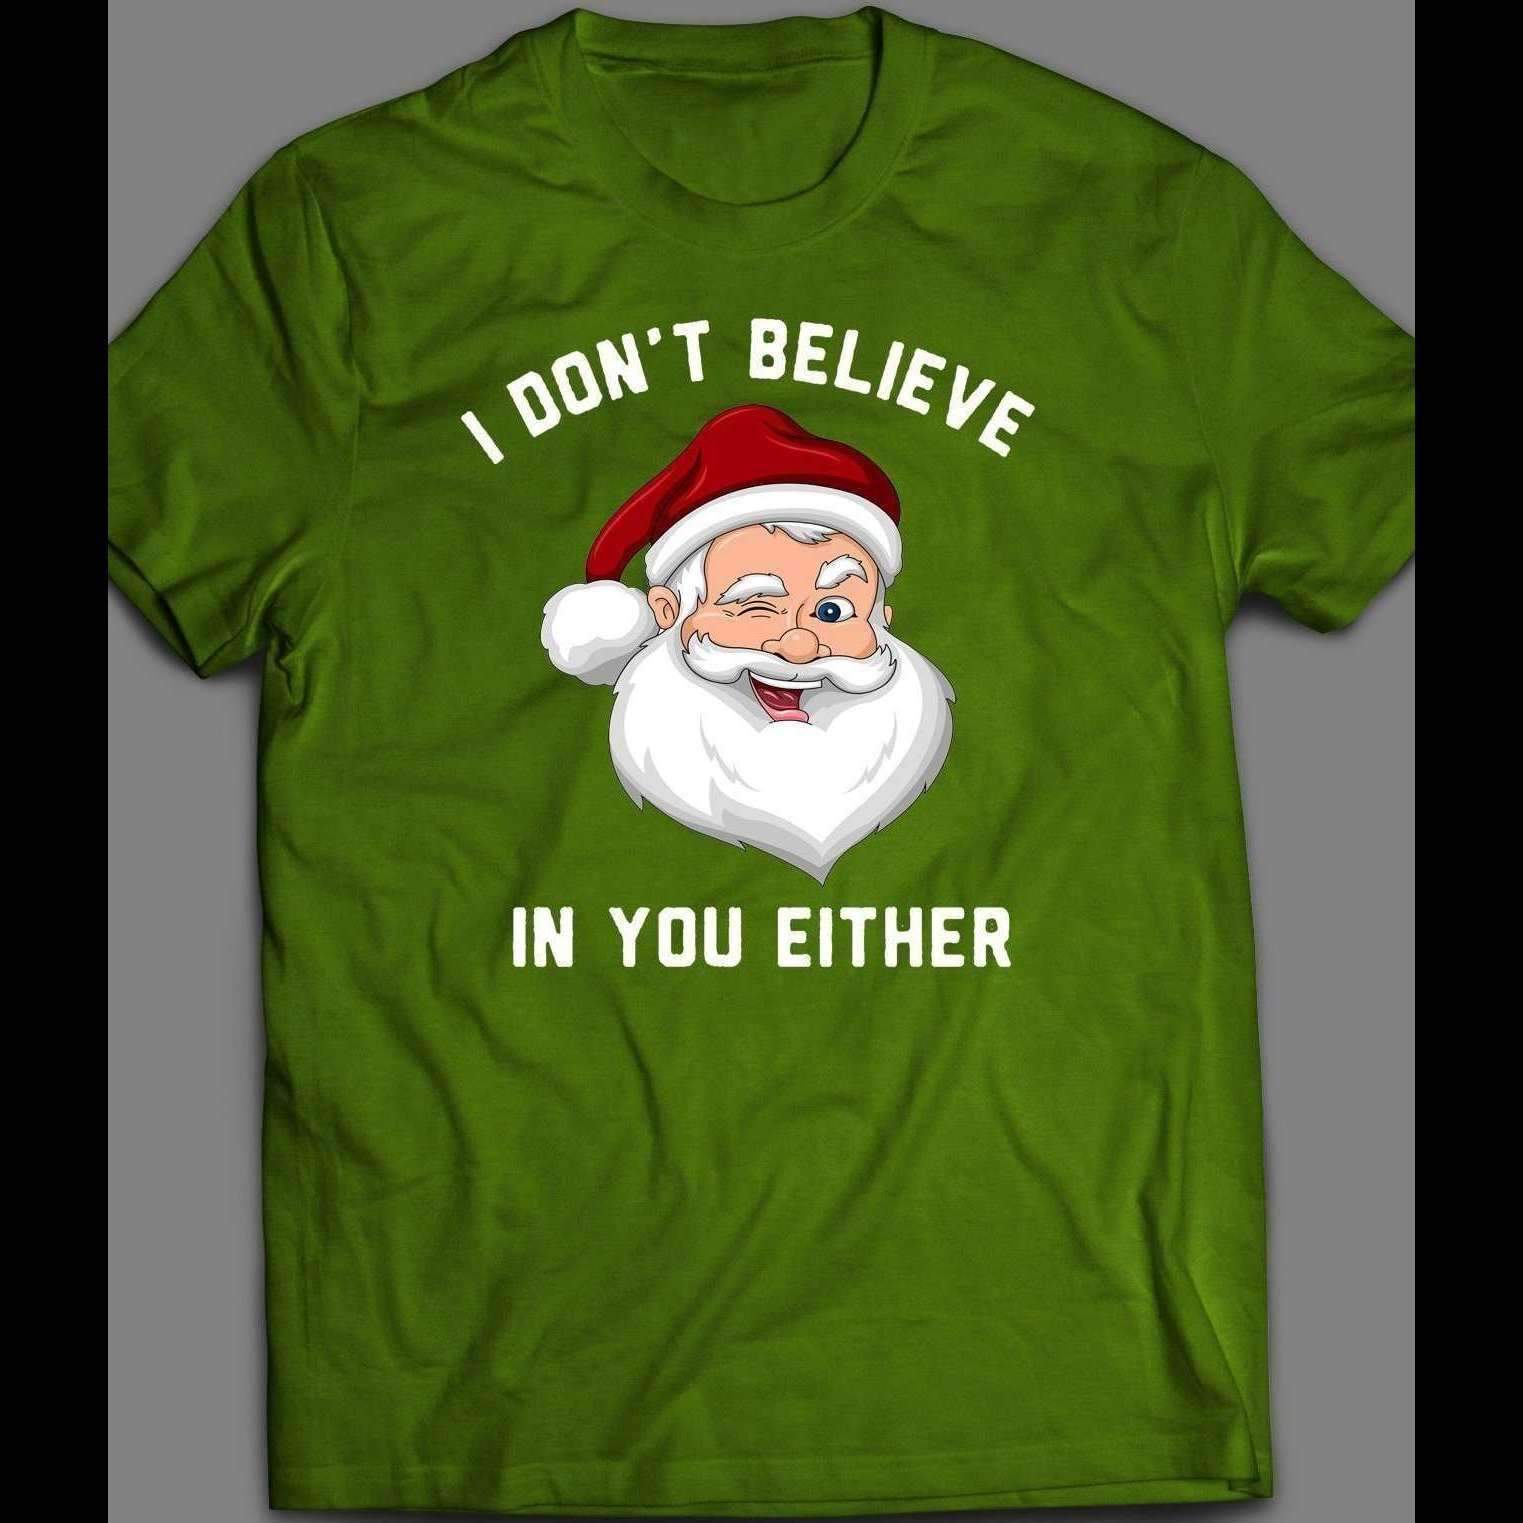 ”I DON’T BELIEVE IN YOU” FUNNY SANTA CLAUS CHRISTMAS XMAS OLDSKOOL SHIRT